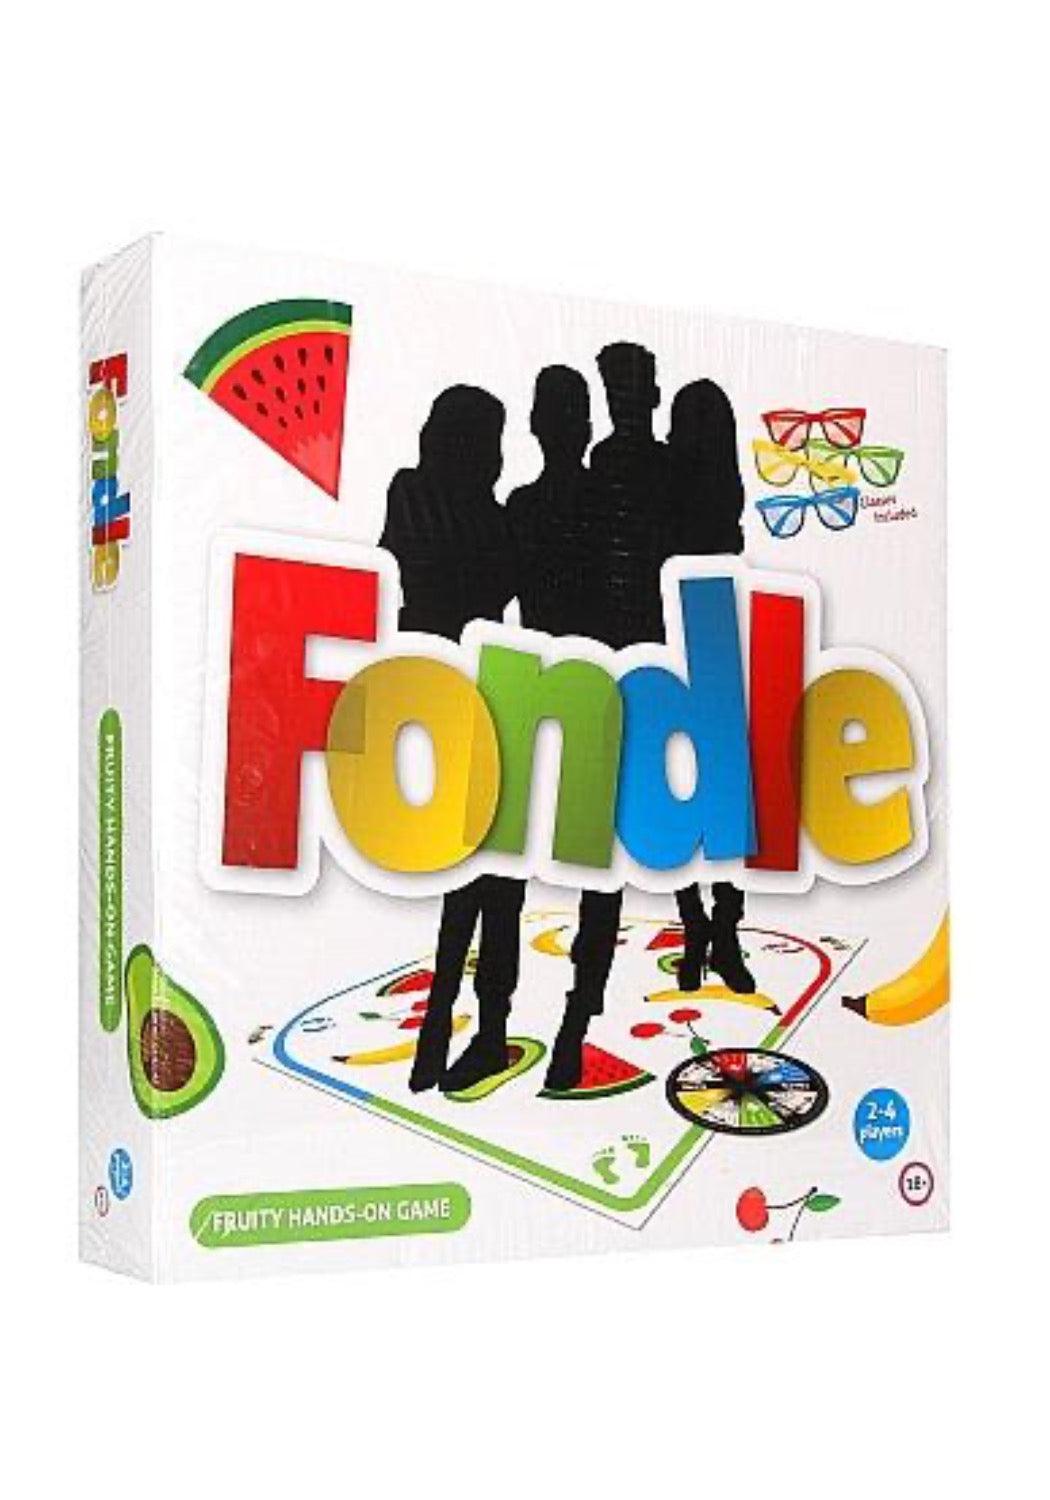 Fondle Fruity Hands On Game - Take A Peek